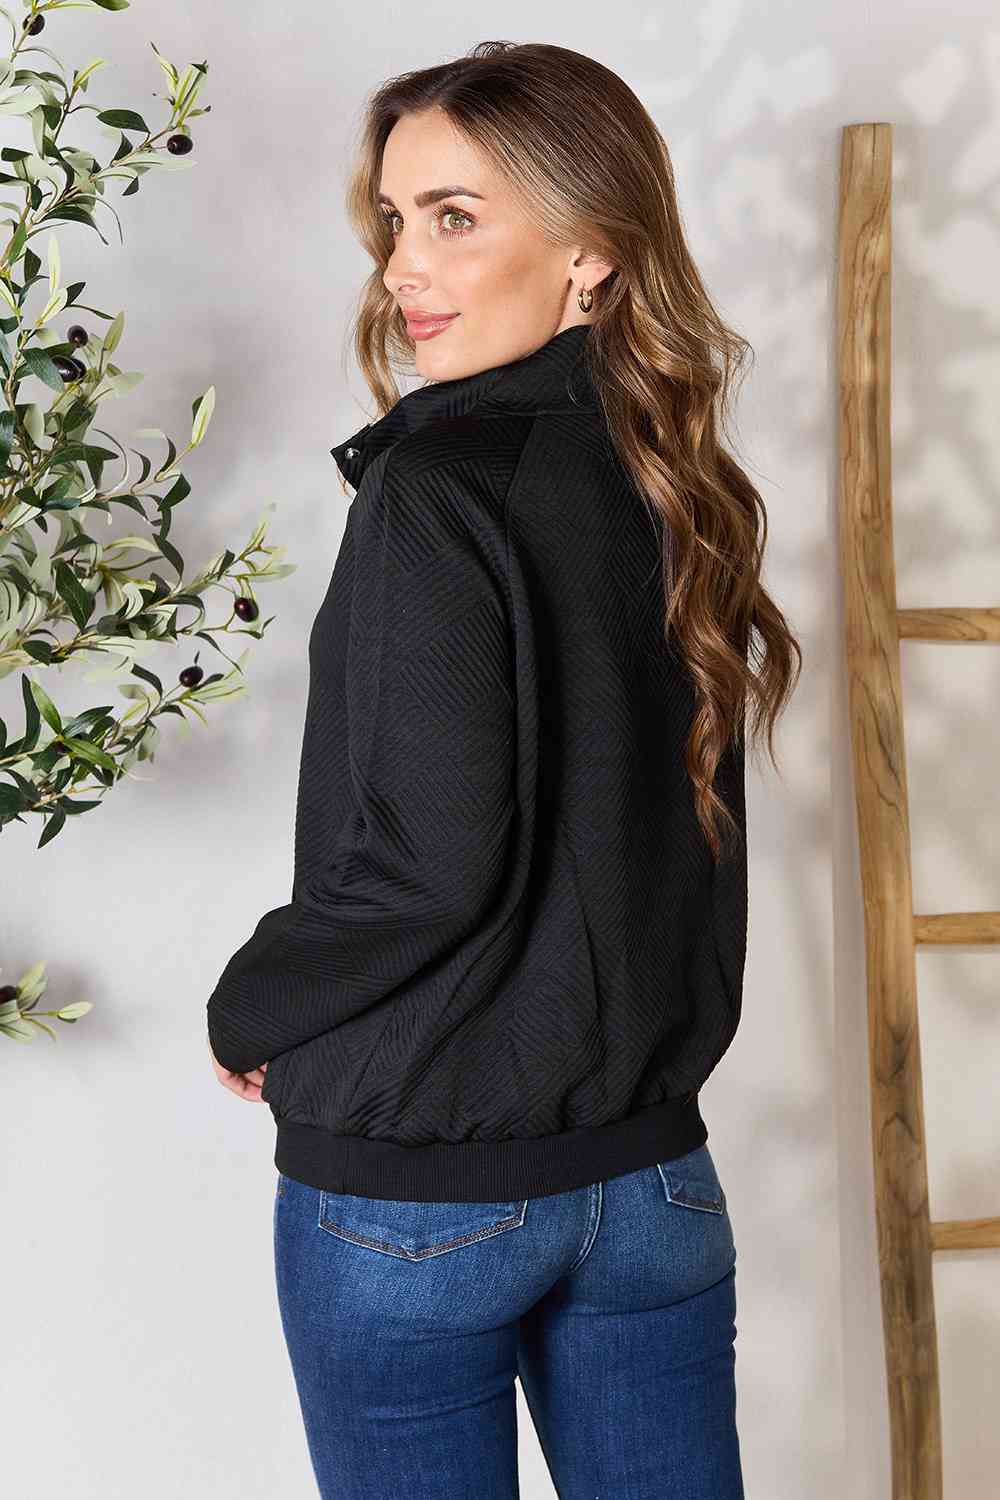 Double Take Half Buttoned Collared Neck Sweatshirt with Pocket 4